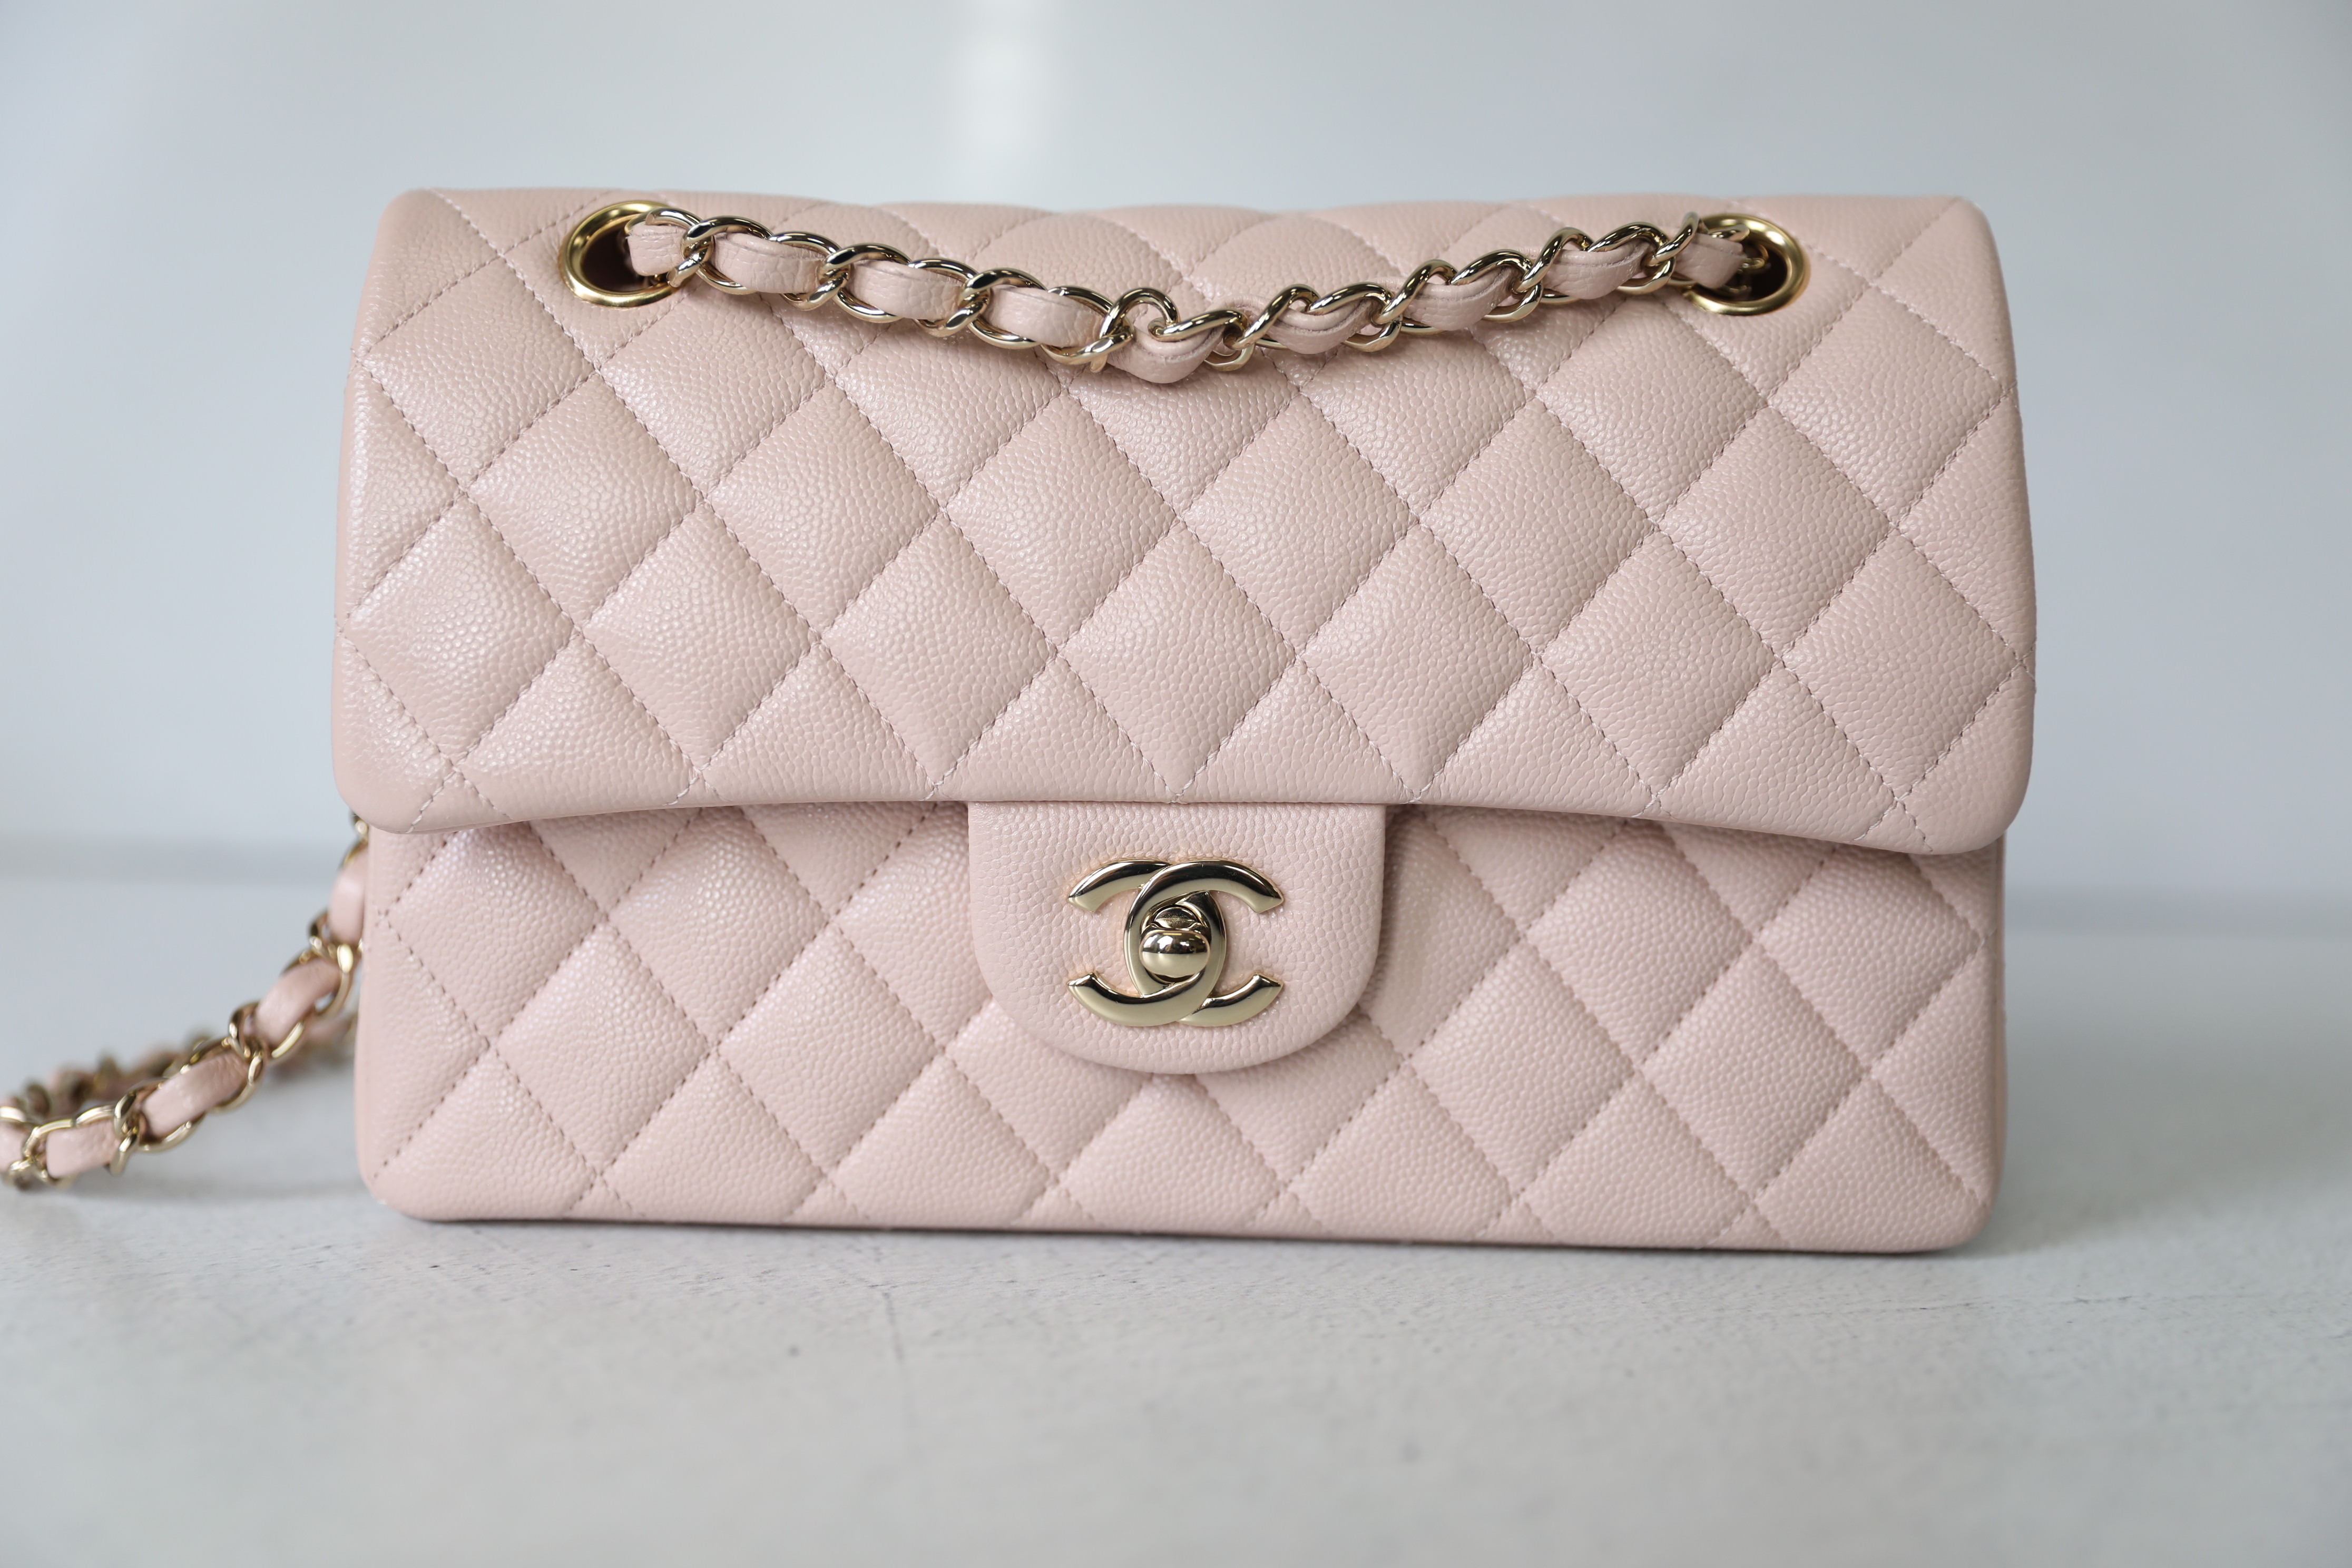 Chanel Classic Small, 21C Rose Claire Caviar with Gold Hardware, Preowned  in Box WA001